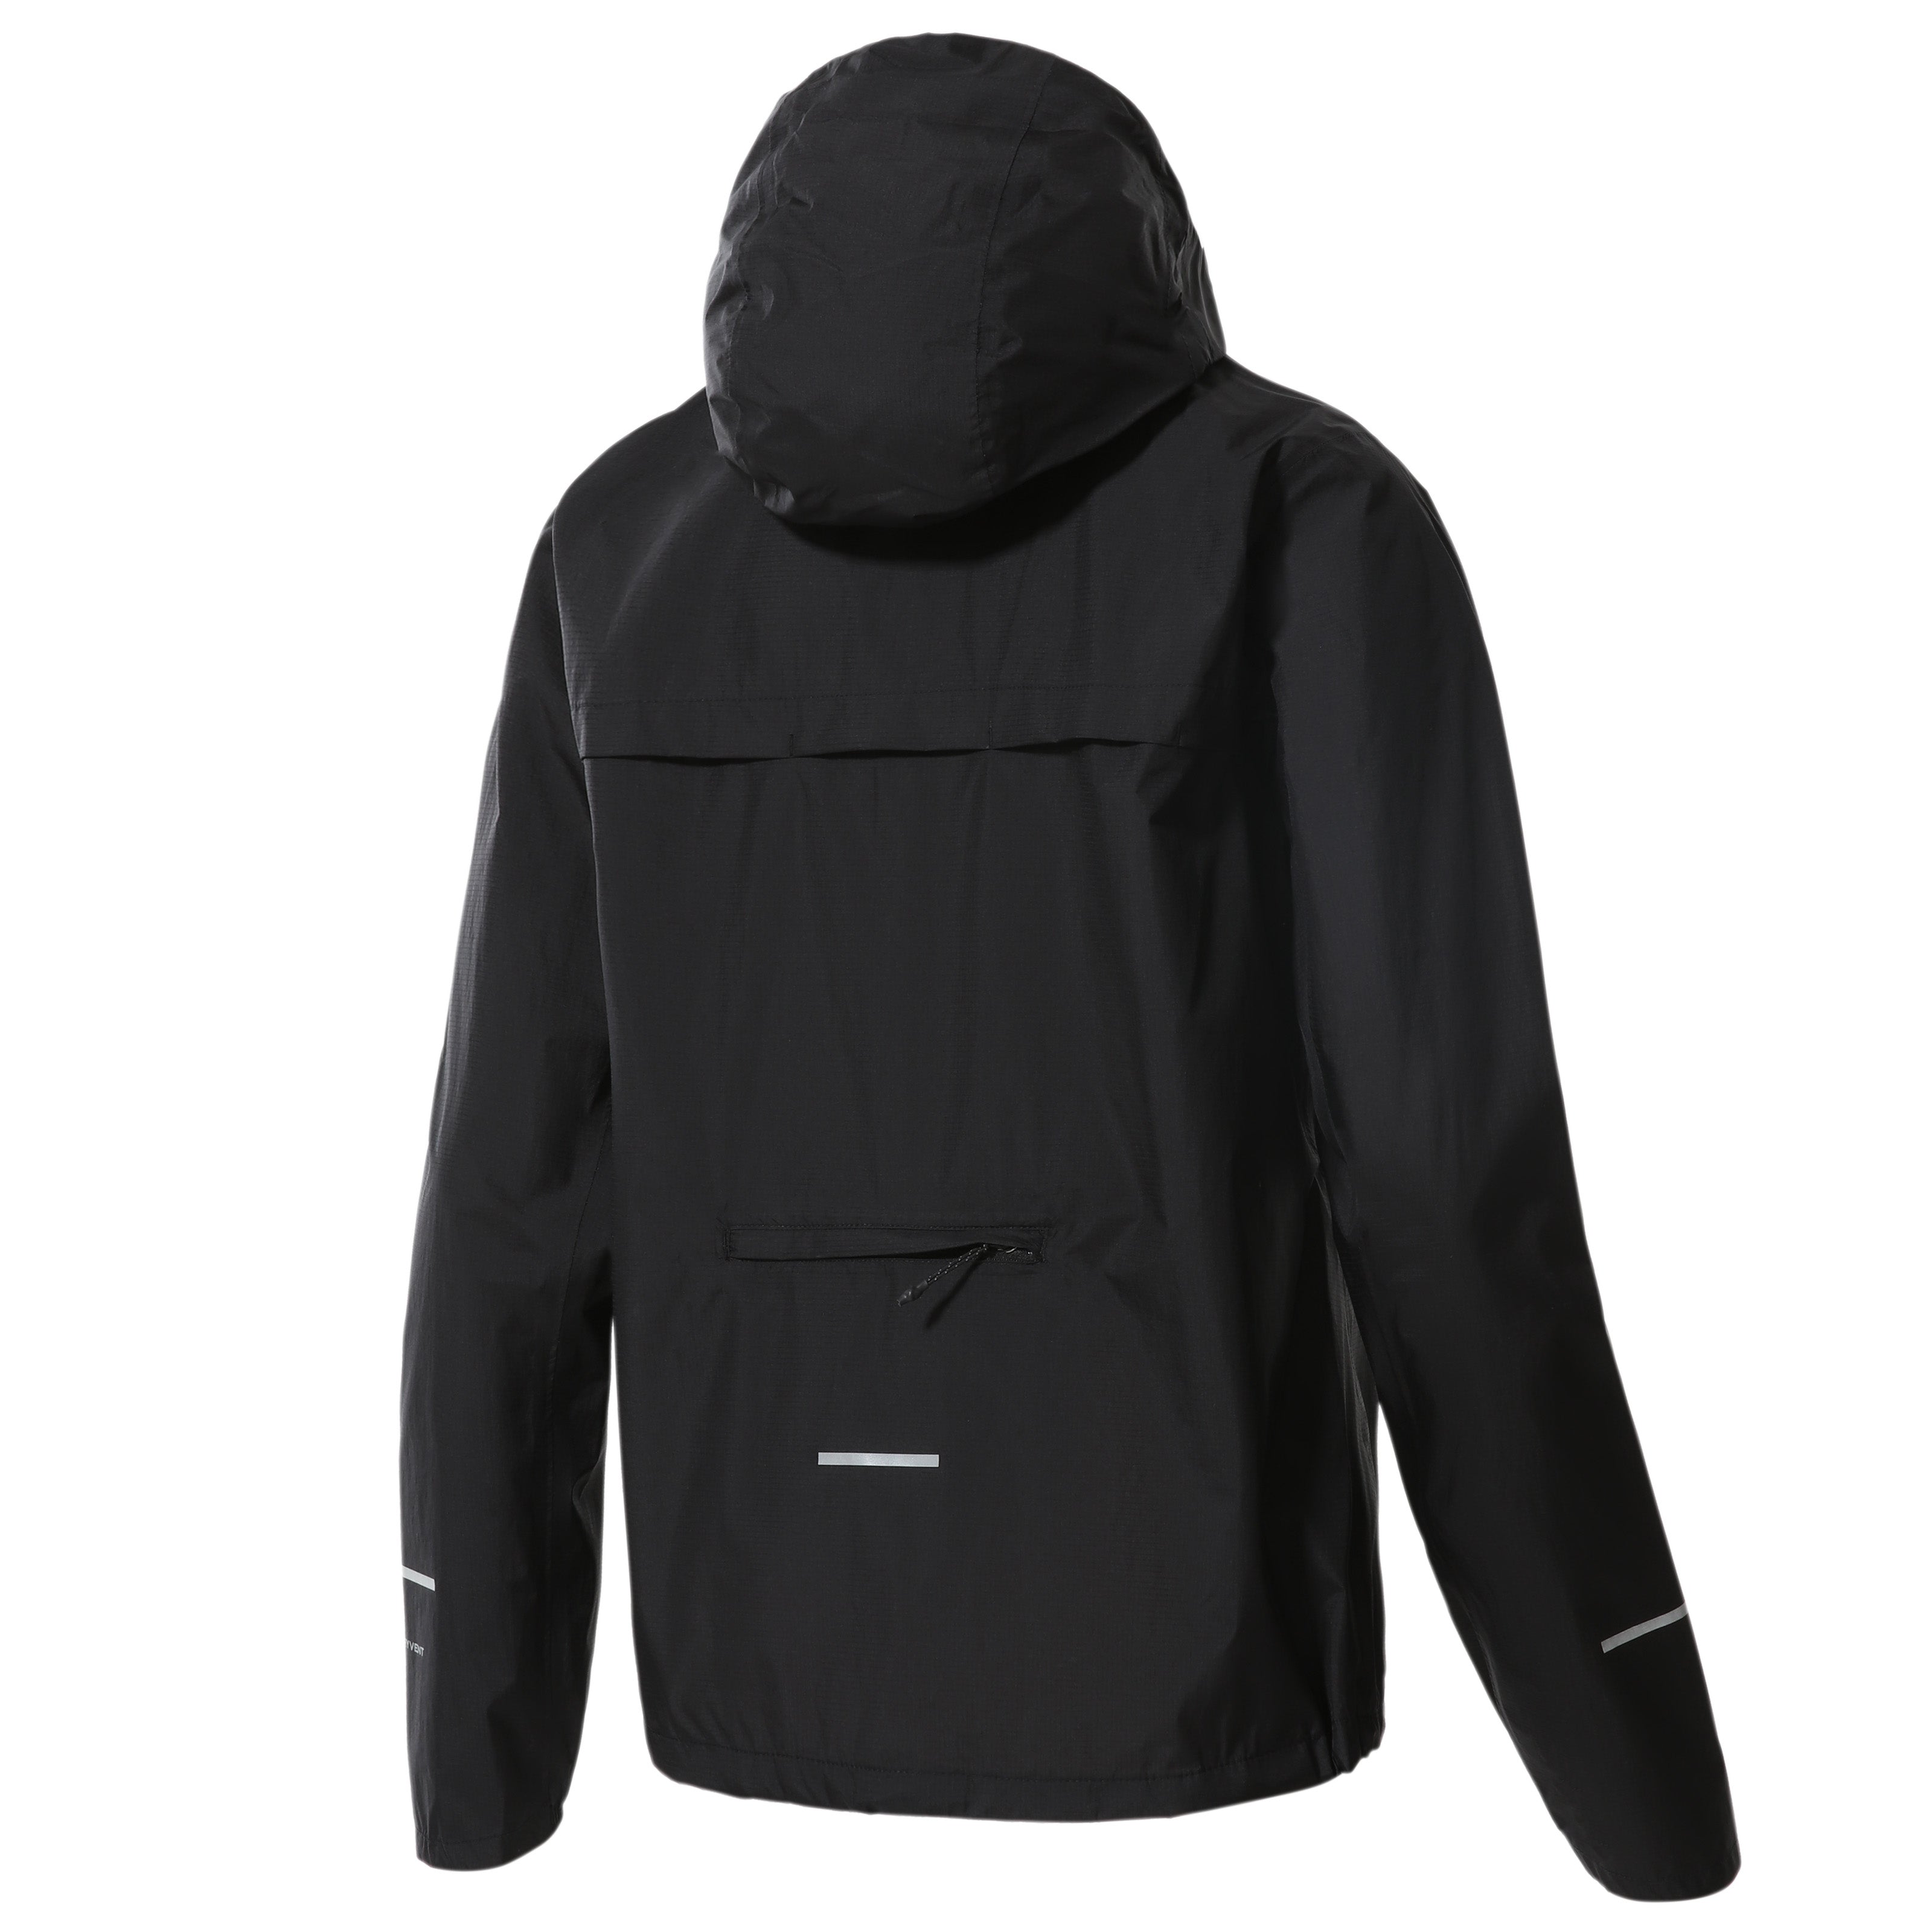 THE NORTH FACE FIRST DAWN JACKET